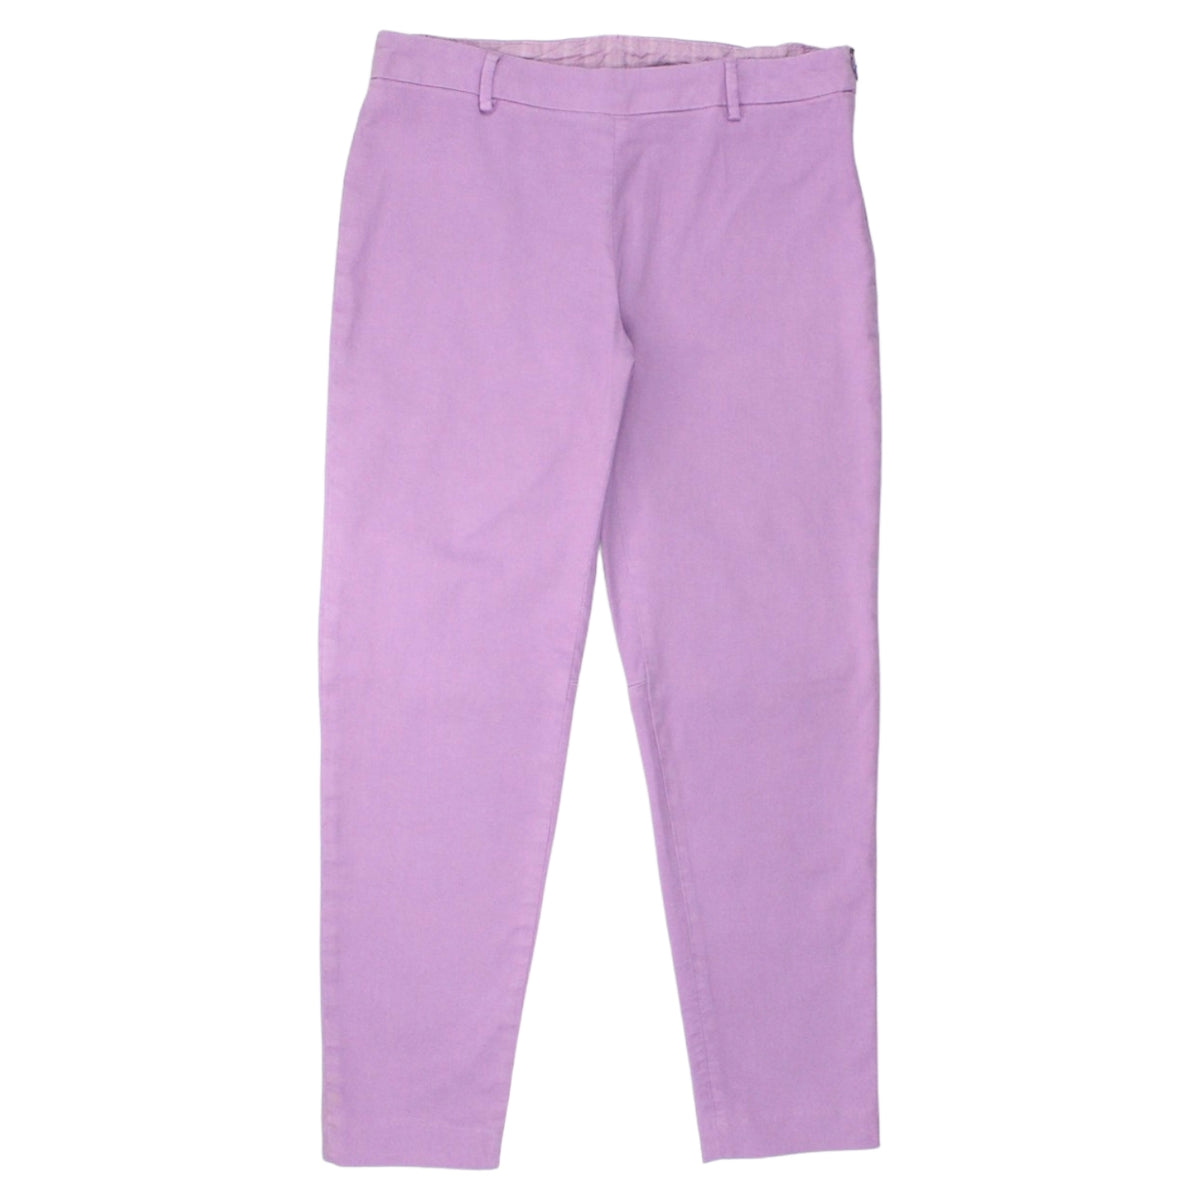 NRBY Lilac Flat Front Trousers - Sample